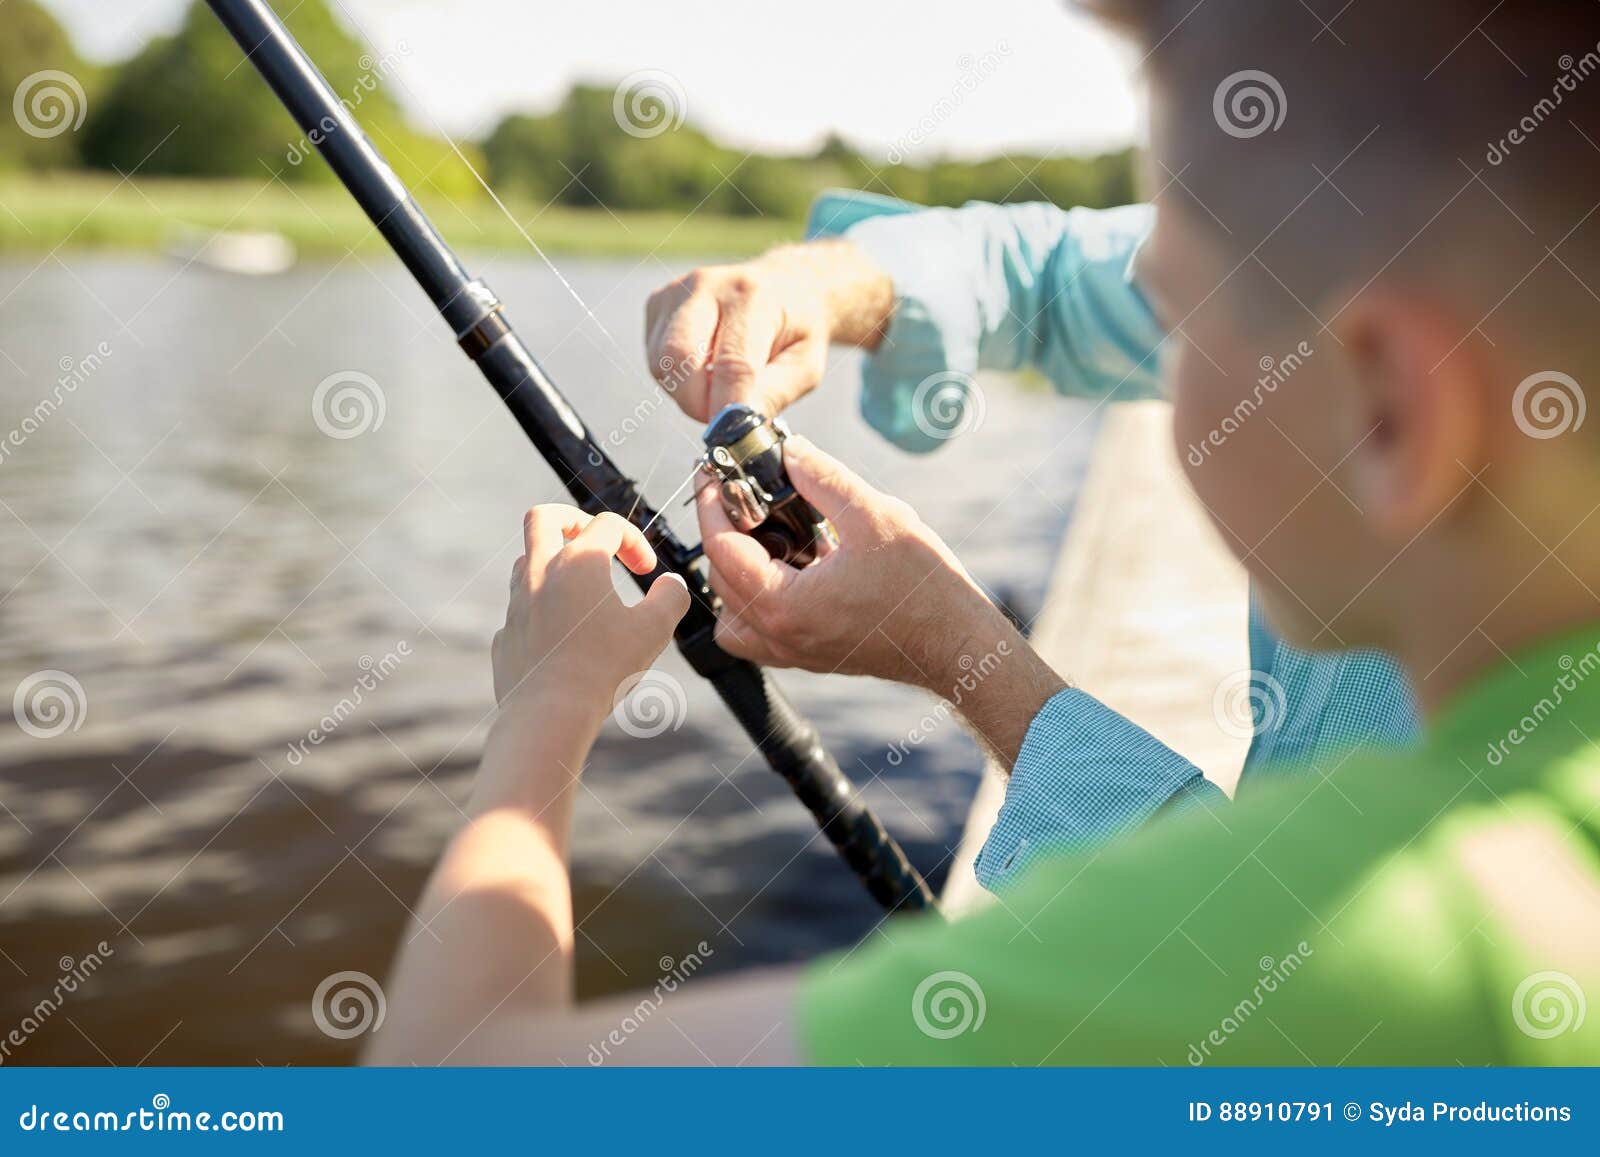 465 Boy Casting Fishing Rod Stock Photos - Free & Royalty-Free Stock Photos  from Dreamstime